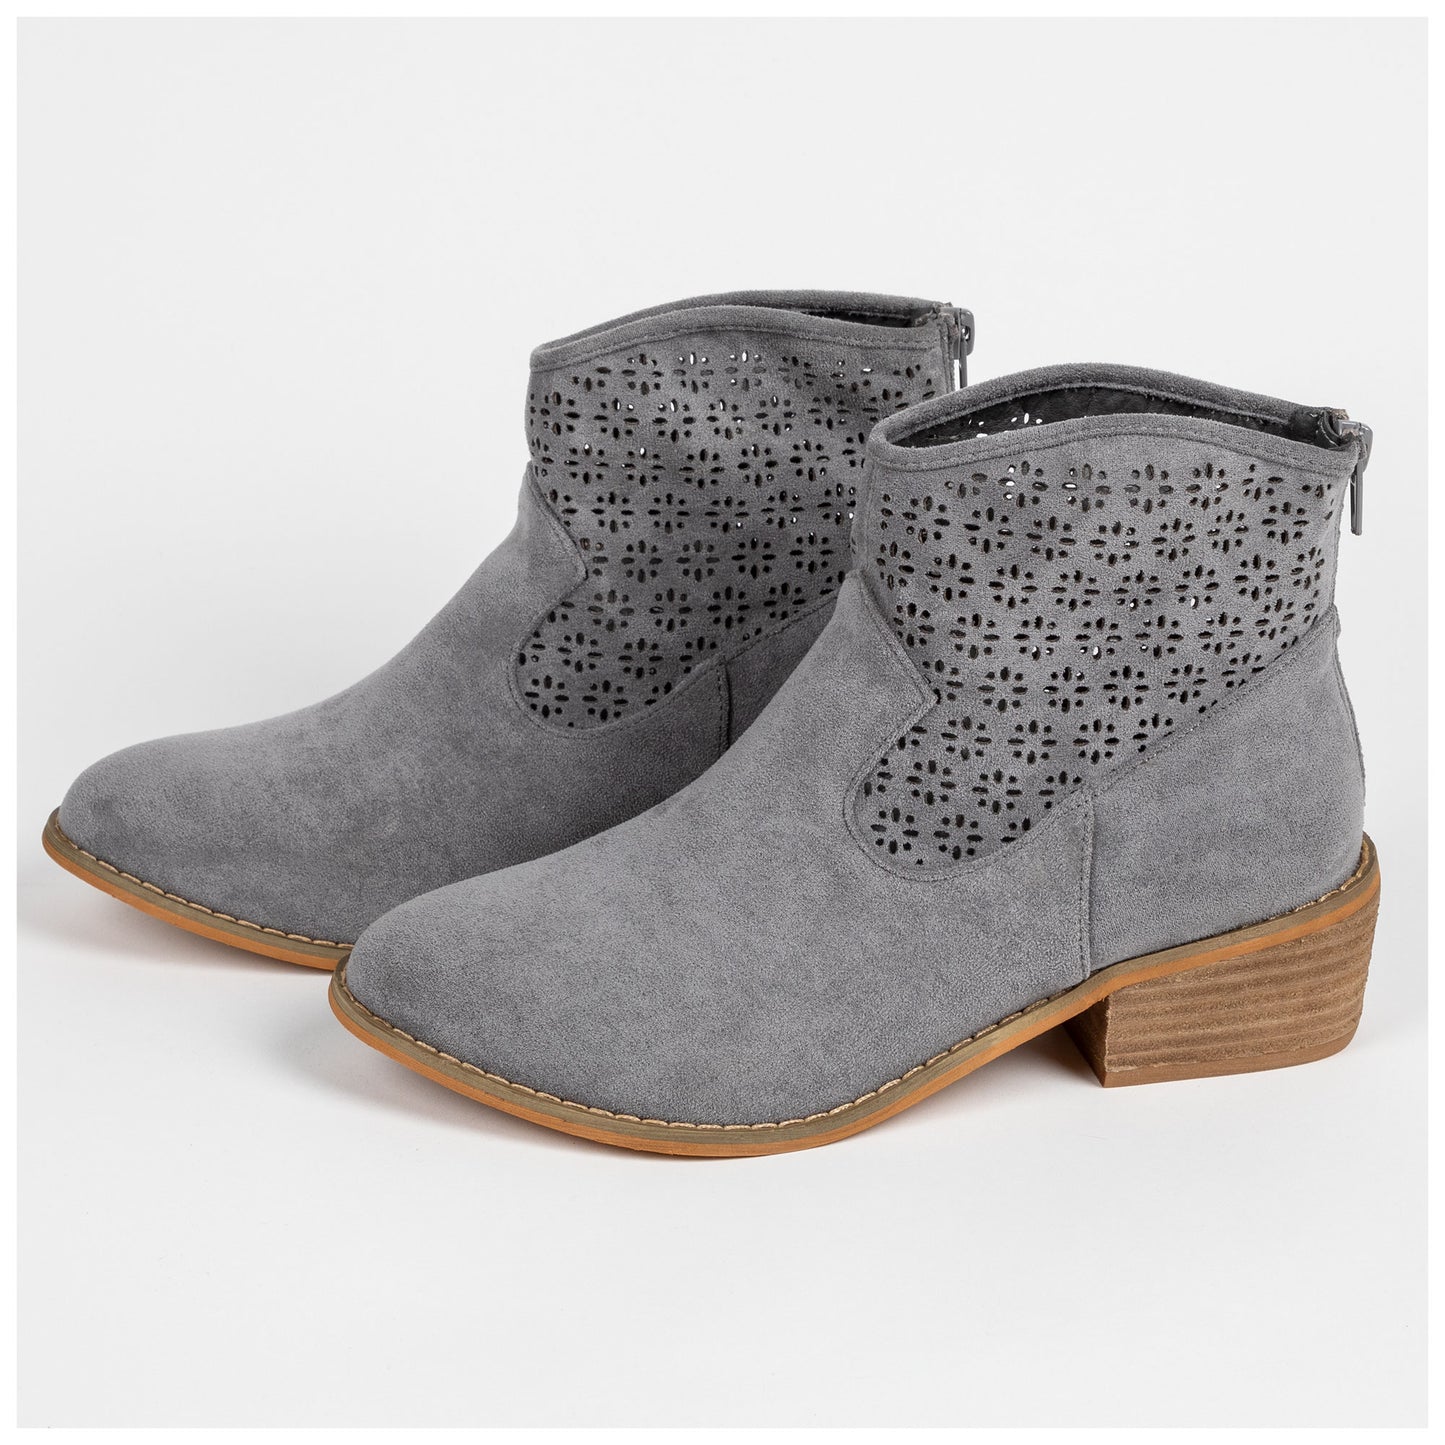 Boutique by Corkys Harvest Low-Heeled Boots